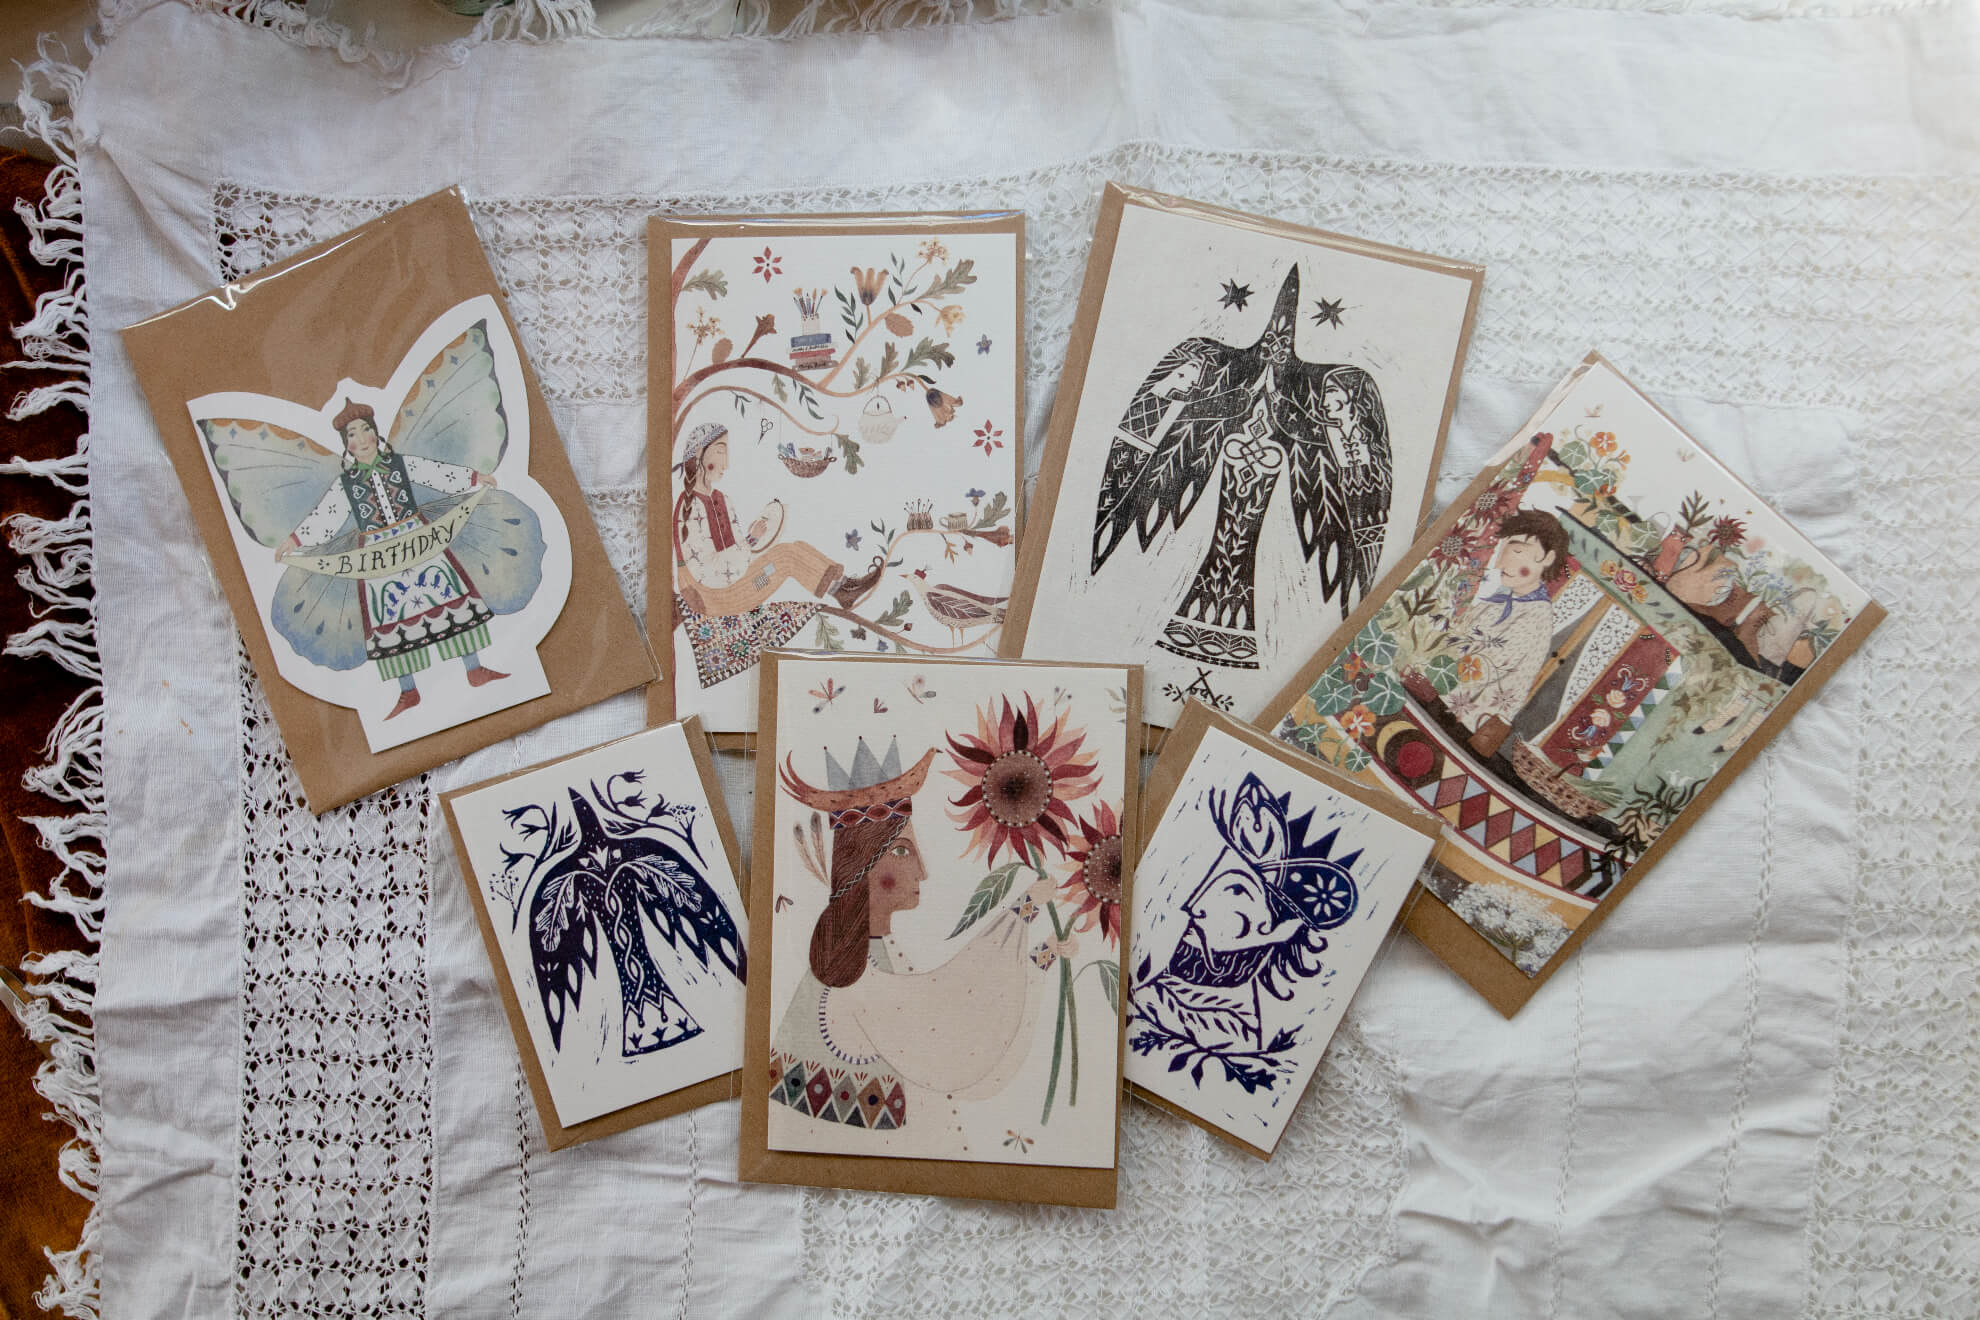 Folk inspired illustrated cards inside the bohemian studio of British illustrator and embroiderer Megan Ivy Griffiths